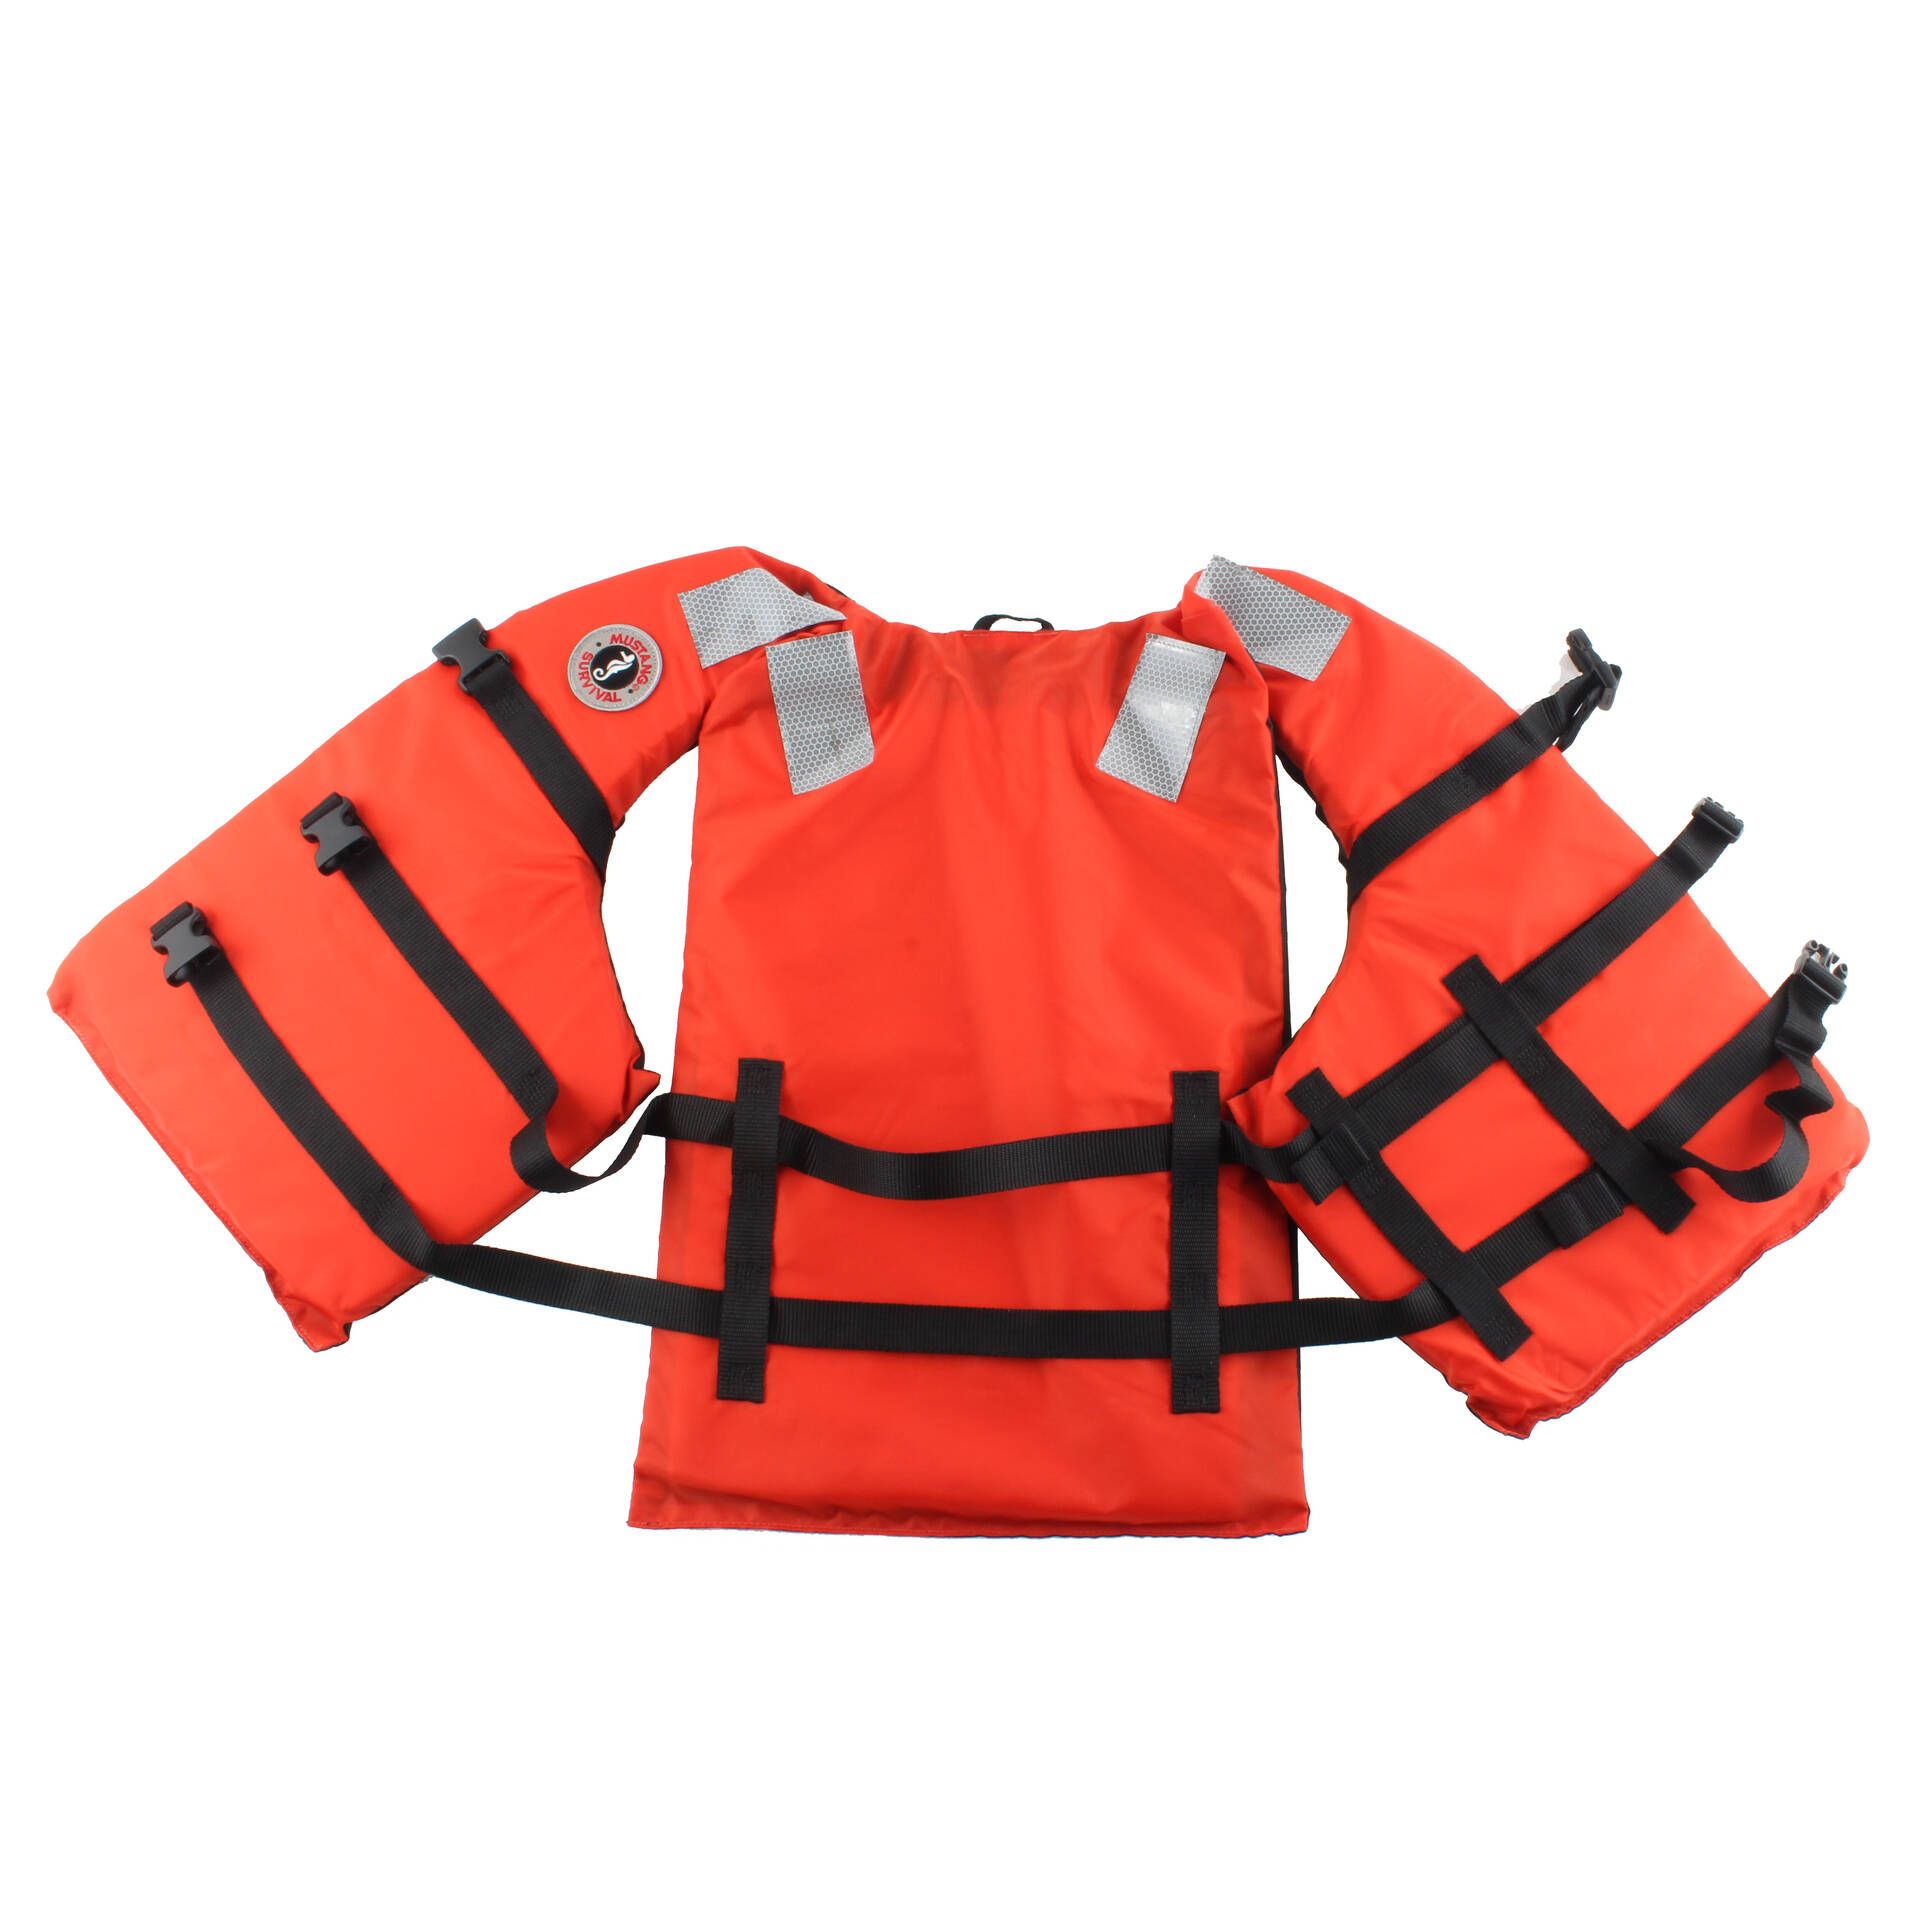 Mustang Survival Classic Industrial Life Jacket/PFD - MV3104T1-2-0